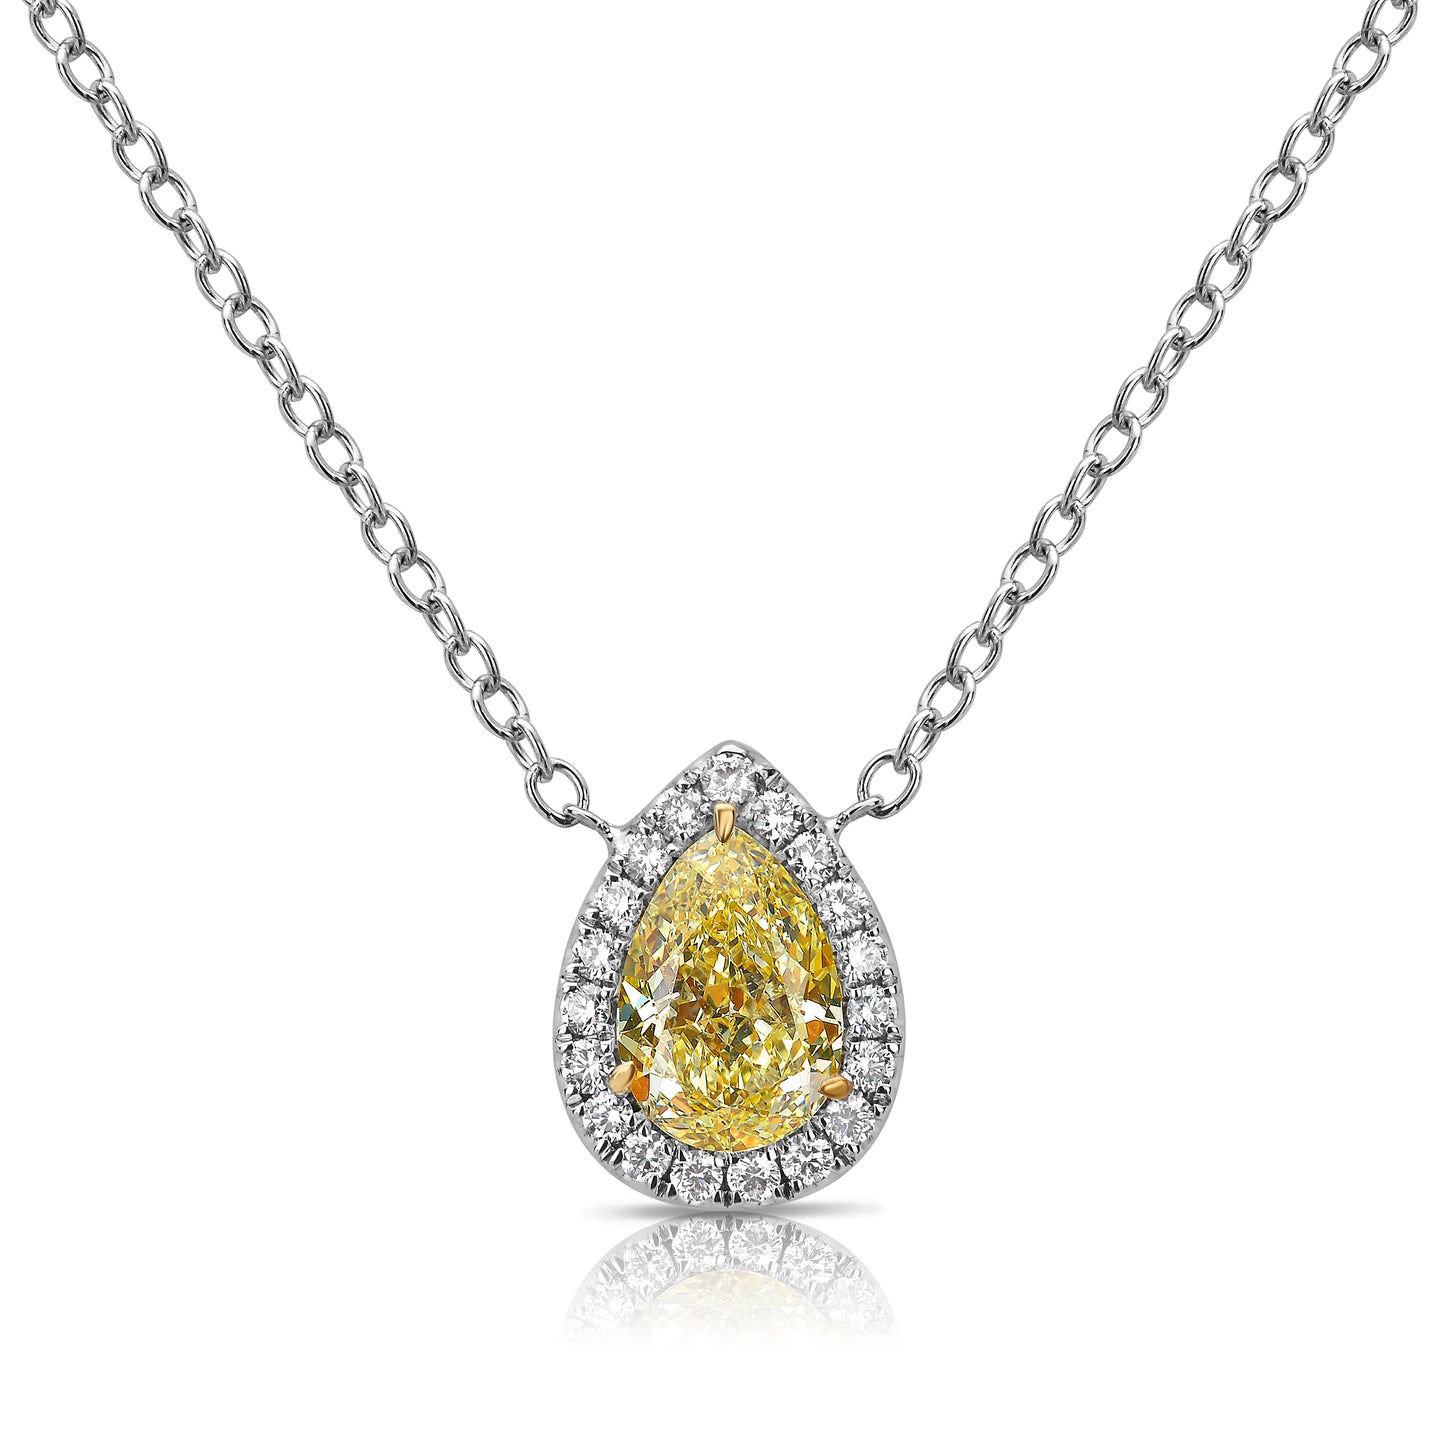 Simple yet elegant yellow diamond pedant that would compliment anyones collection. 1 Carat carat natural fancy light yellow pear shape diamond. Set in 18 karat gold with classic halo. Handmade in New York City.